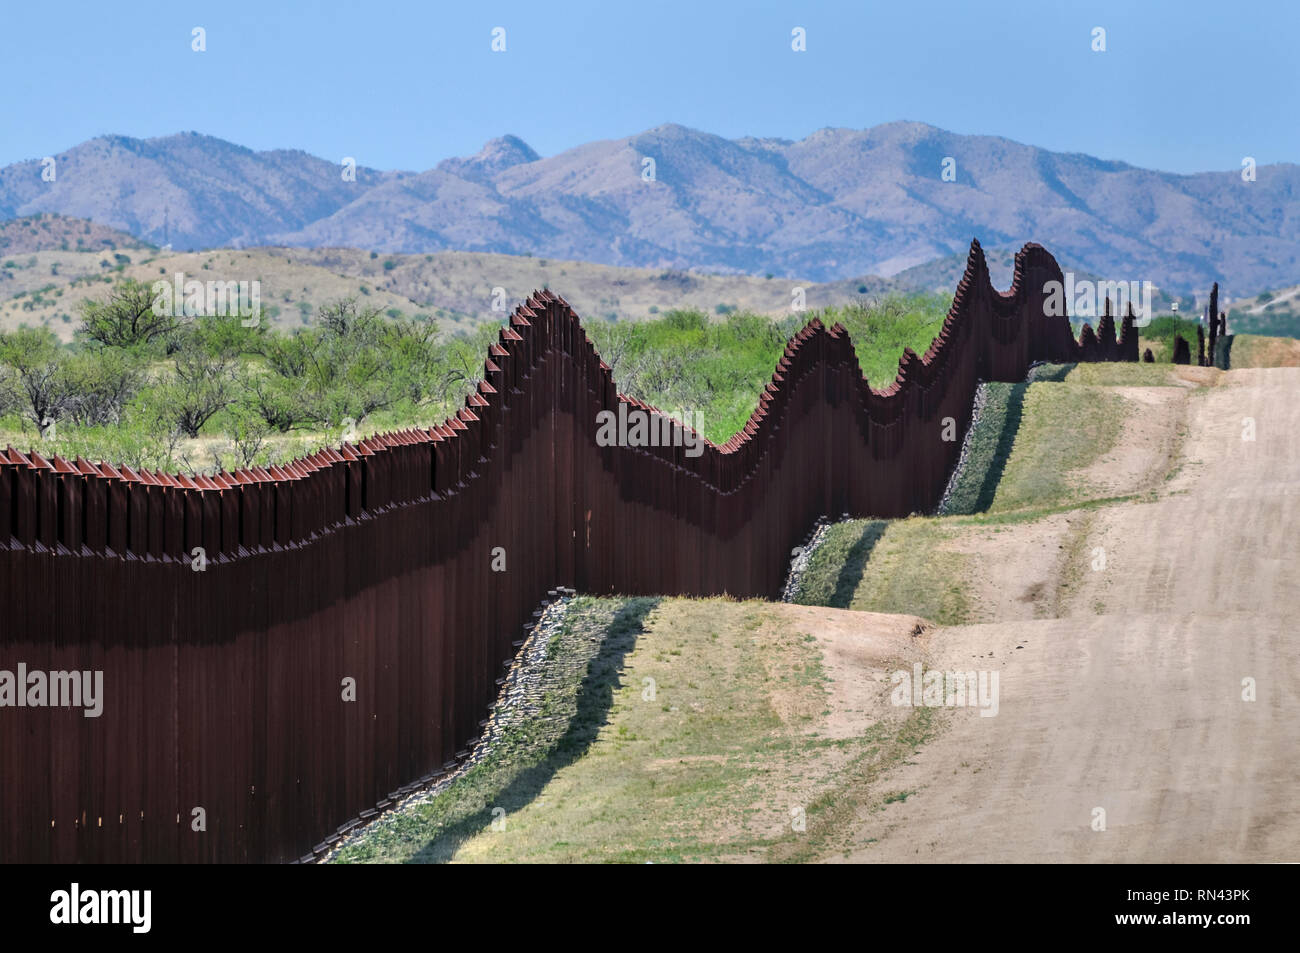 US border fence on Mexico boundary, bollard style pedestrian barrier, viewed from US side toward Mexican mountains,east of Nogales Arizona, April 2018 Stock Photo